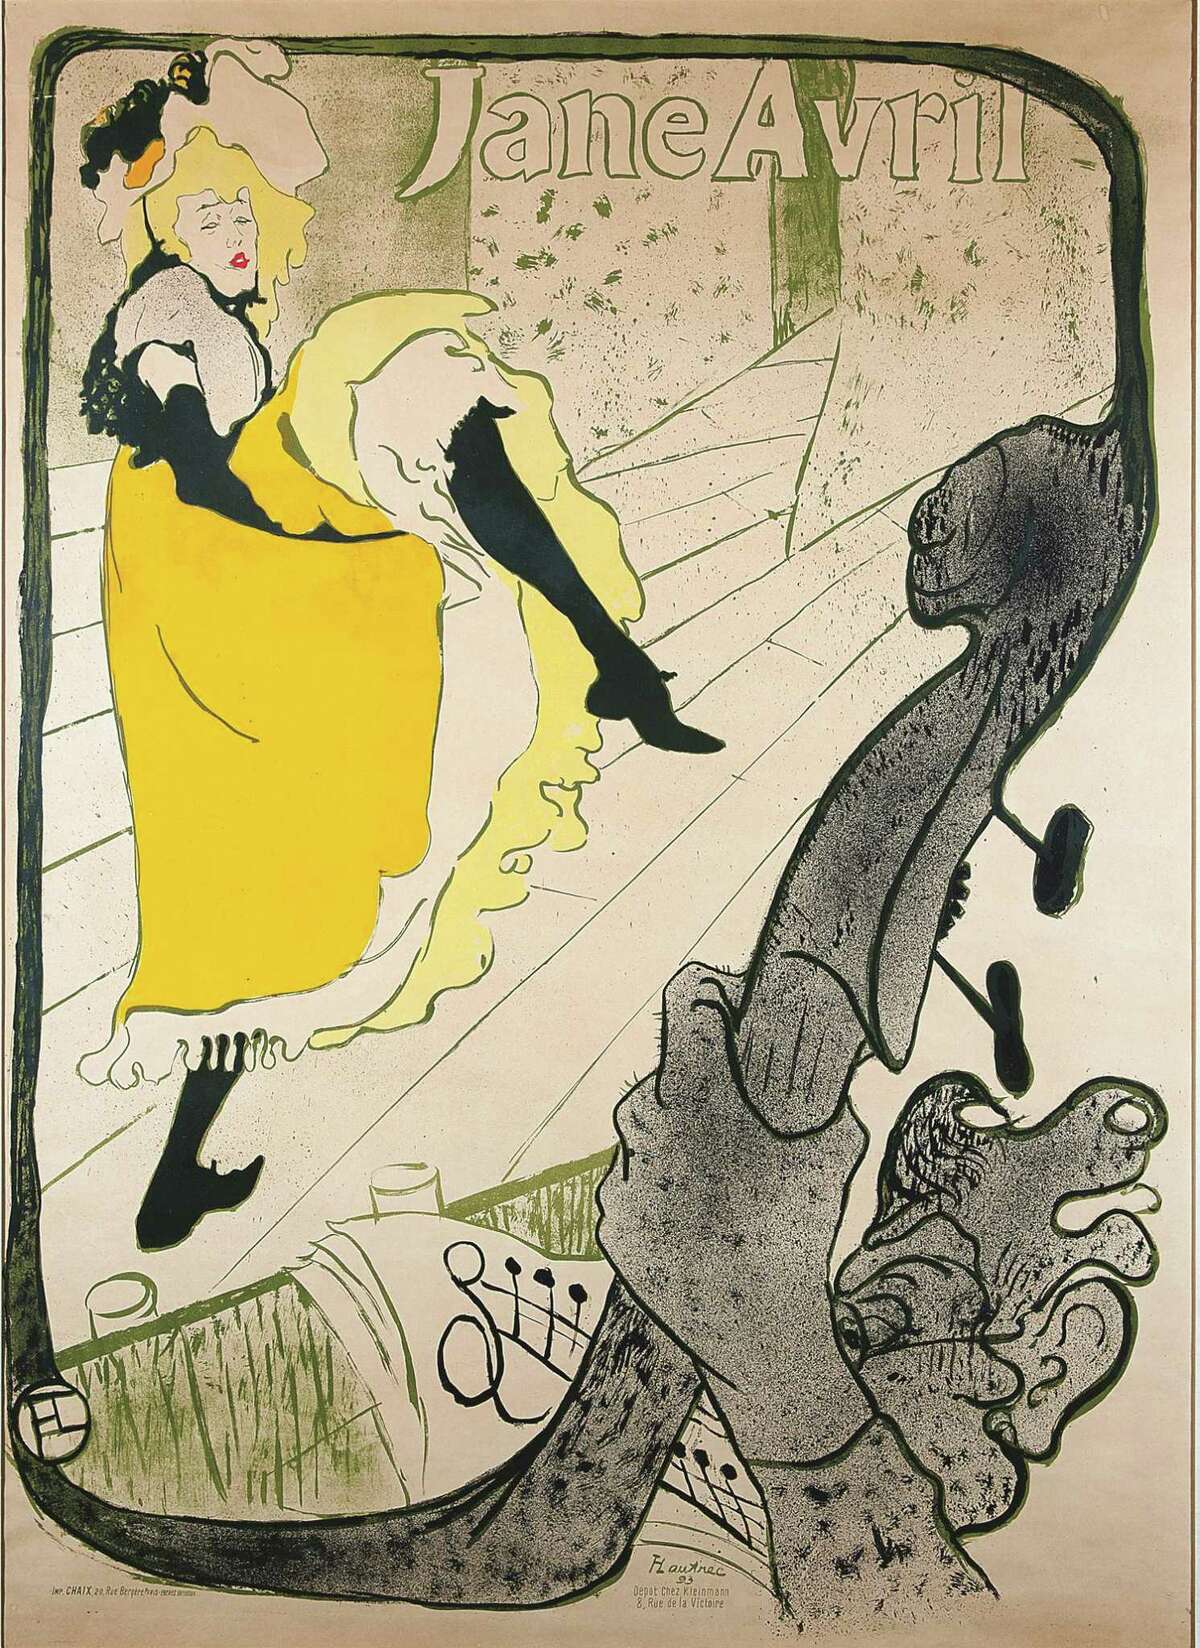 “Jane Avril,” by Henri Toulouse-Lautrec, will be on view at the Bruce Museum in Greenwich Sept. 23 through Jan. 7.